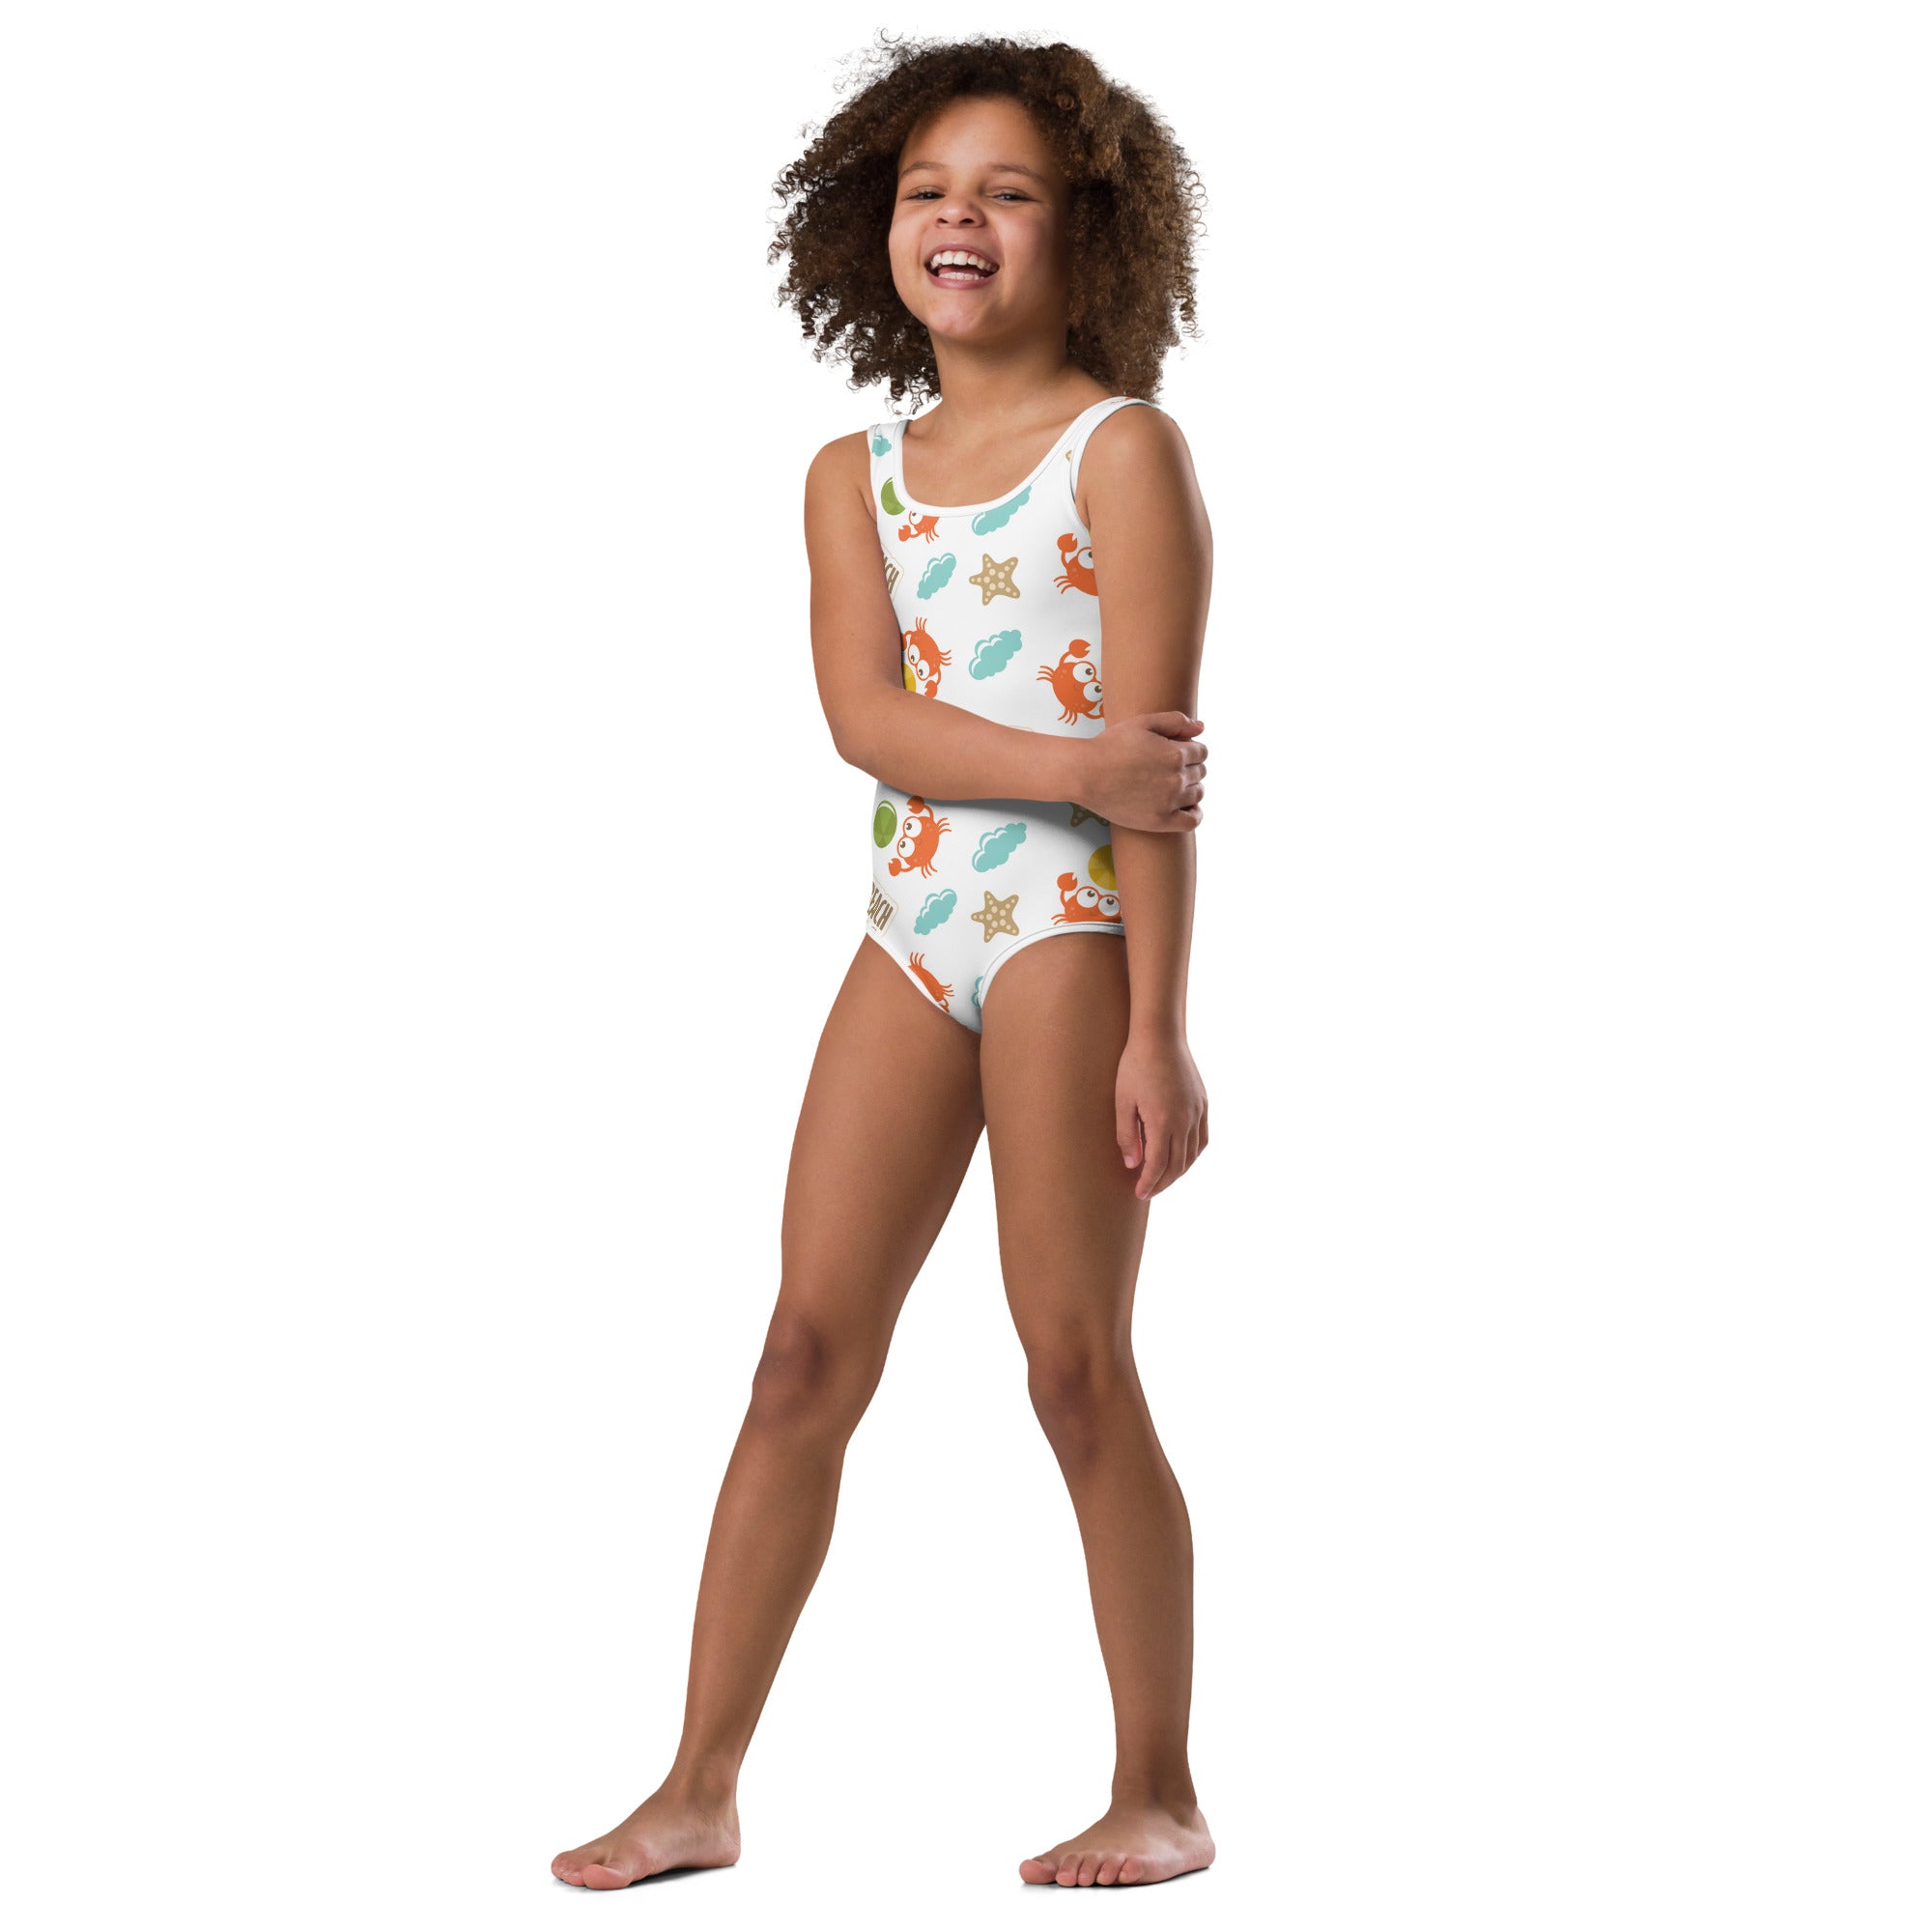 Kids' Printed One-Piece Swimsuit - Beach Day